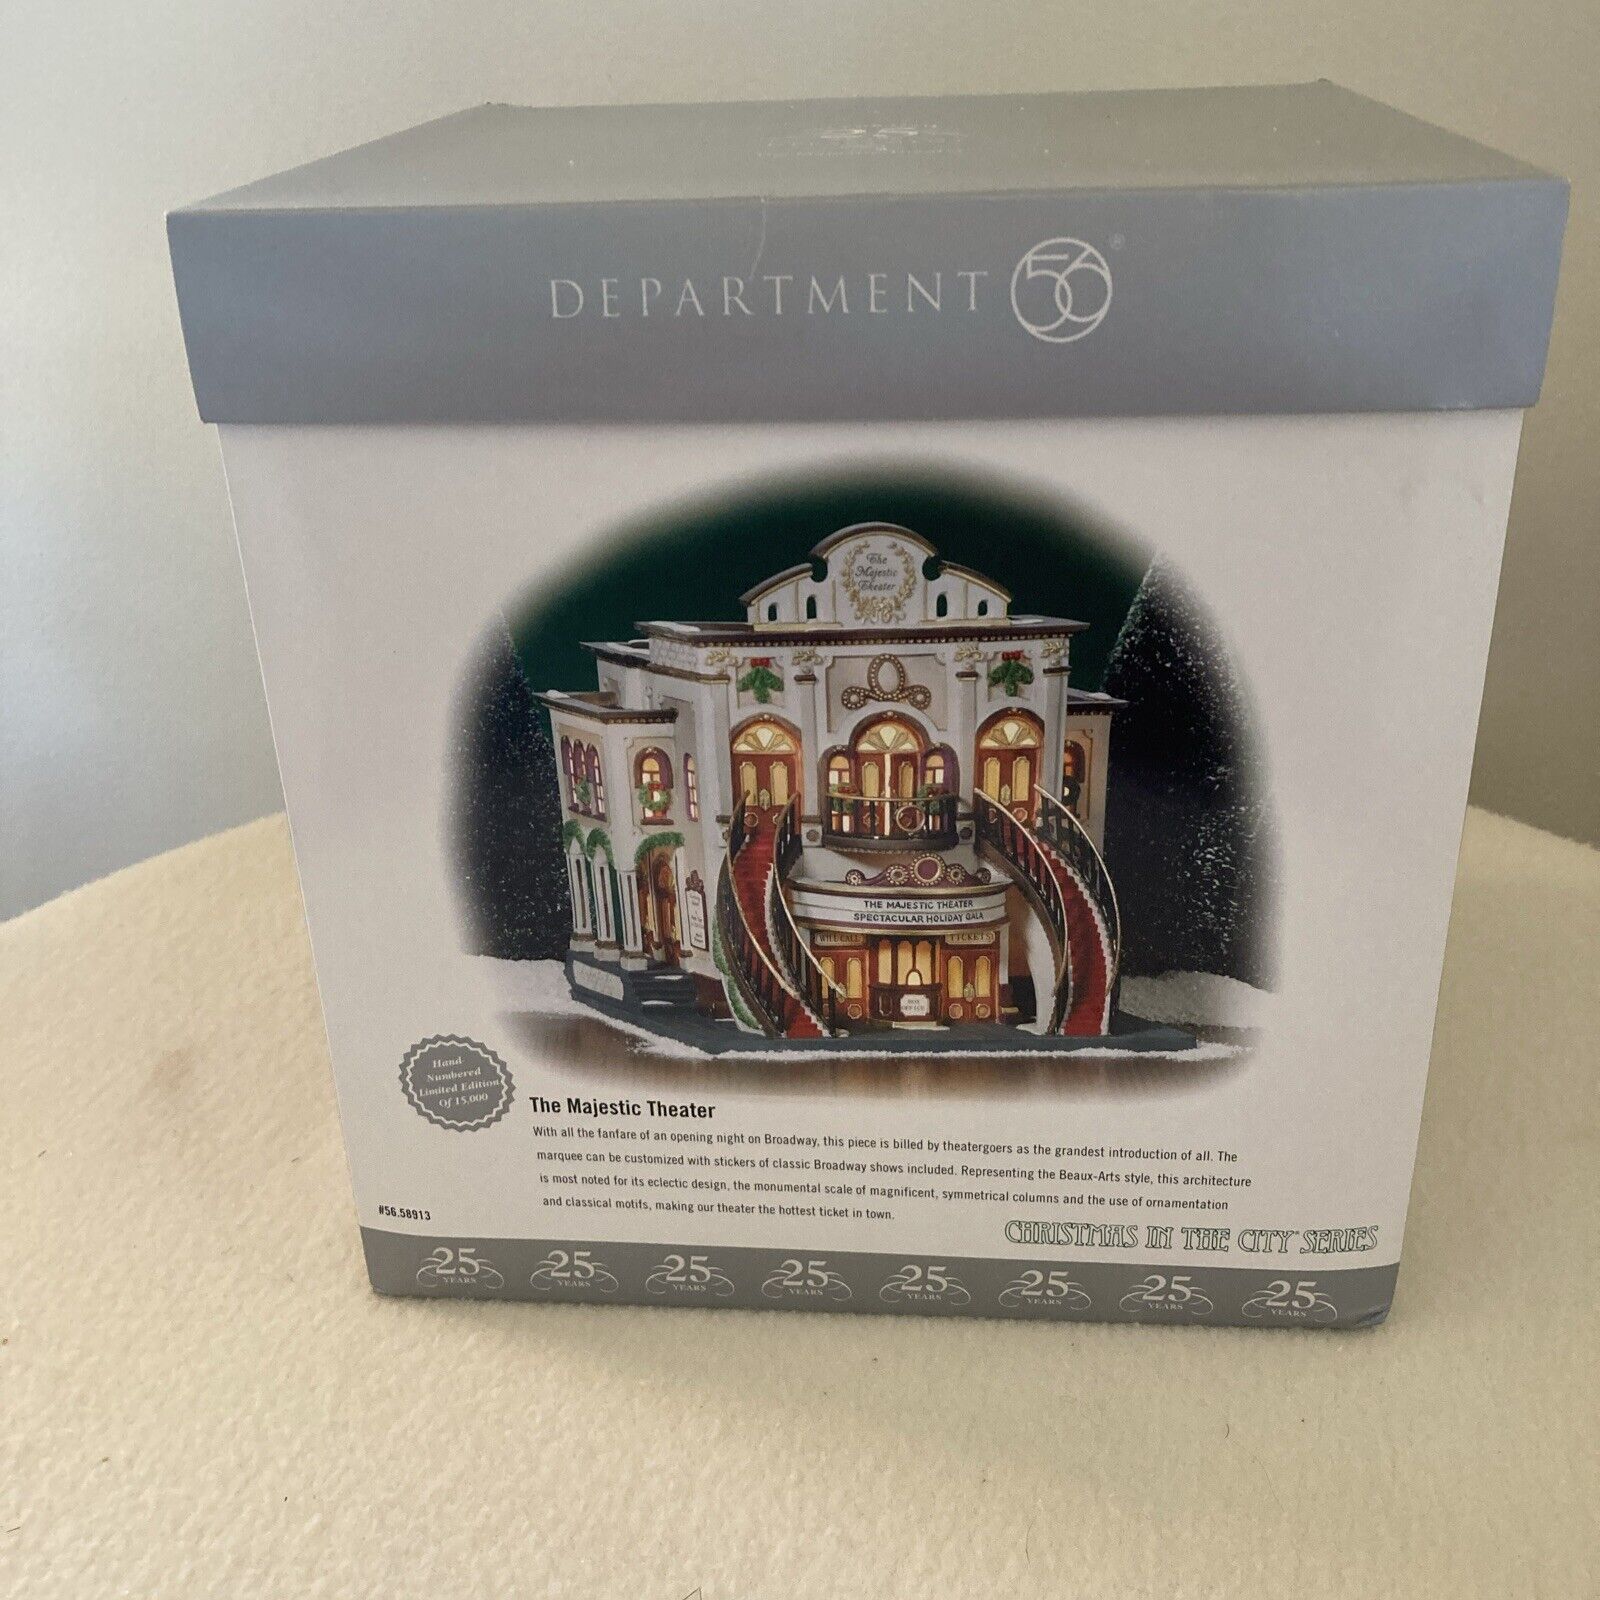 DEPT 56 Christmas in the City Majestic Theater 25th Anniversary Edition 58913